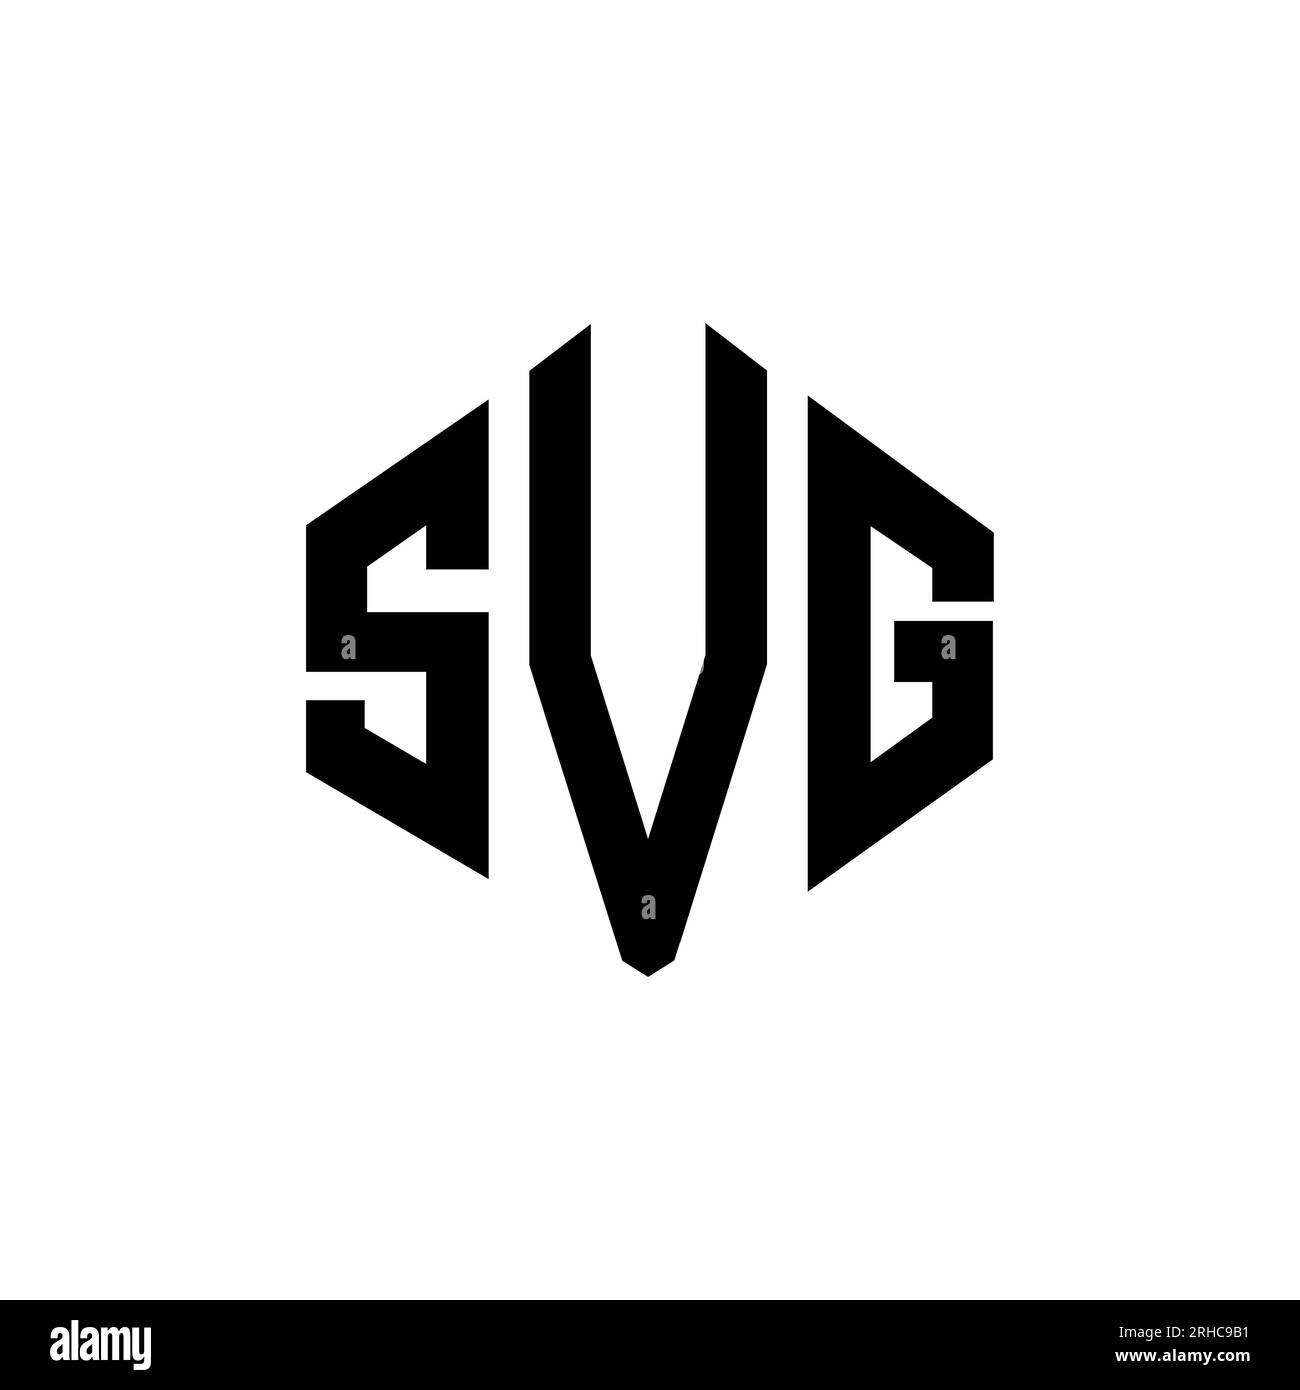 Svg letter Black and White Stock Photos & Images - Alamy